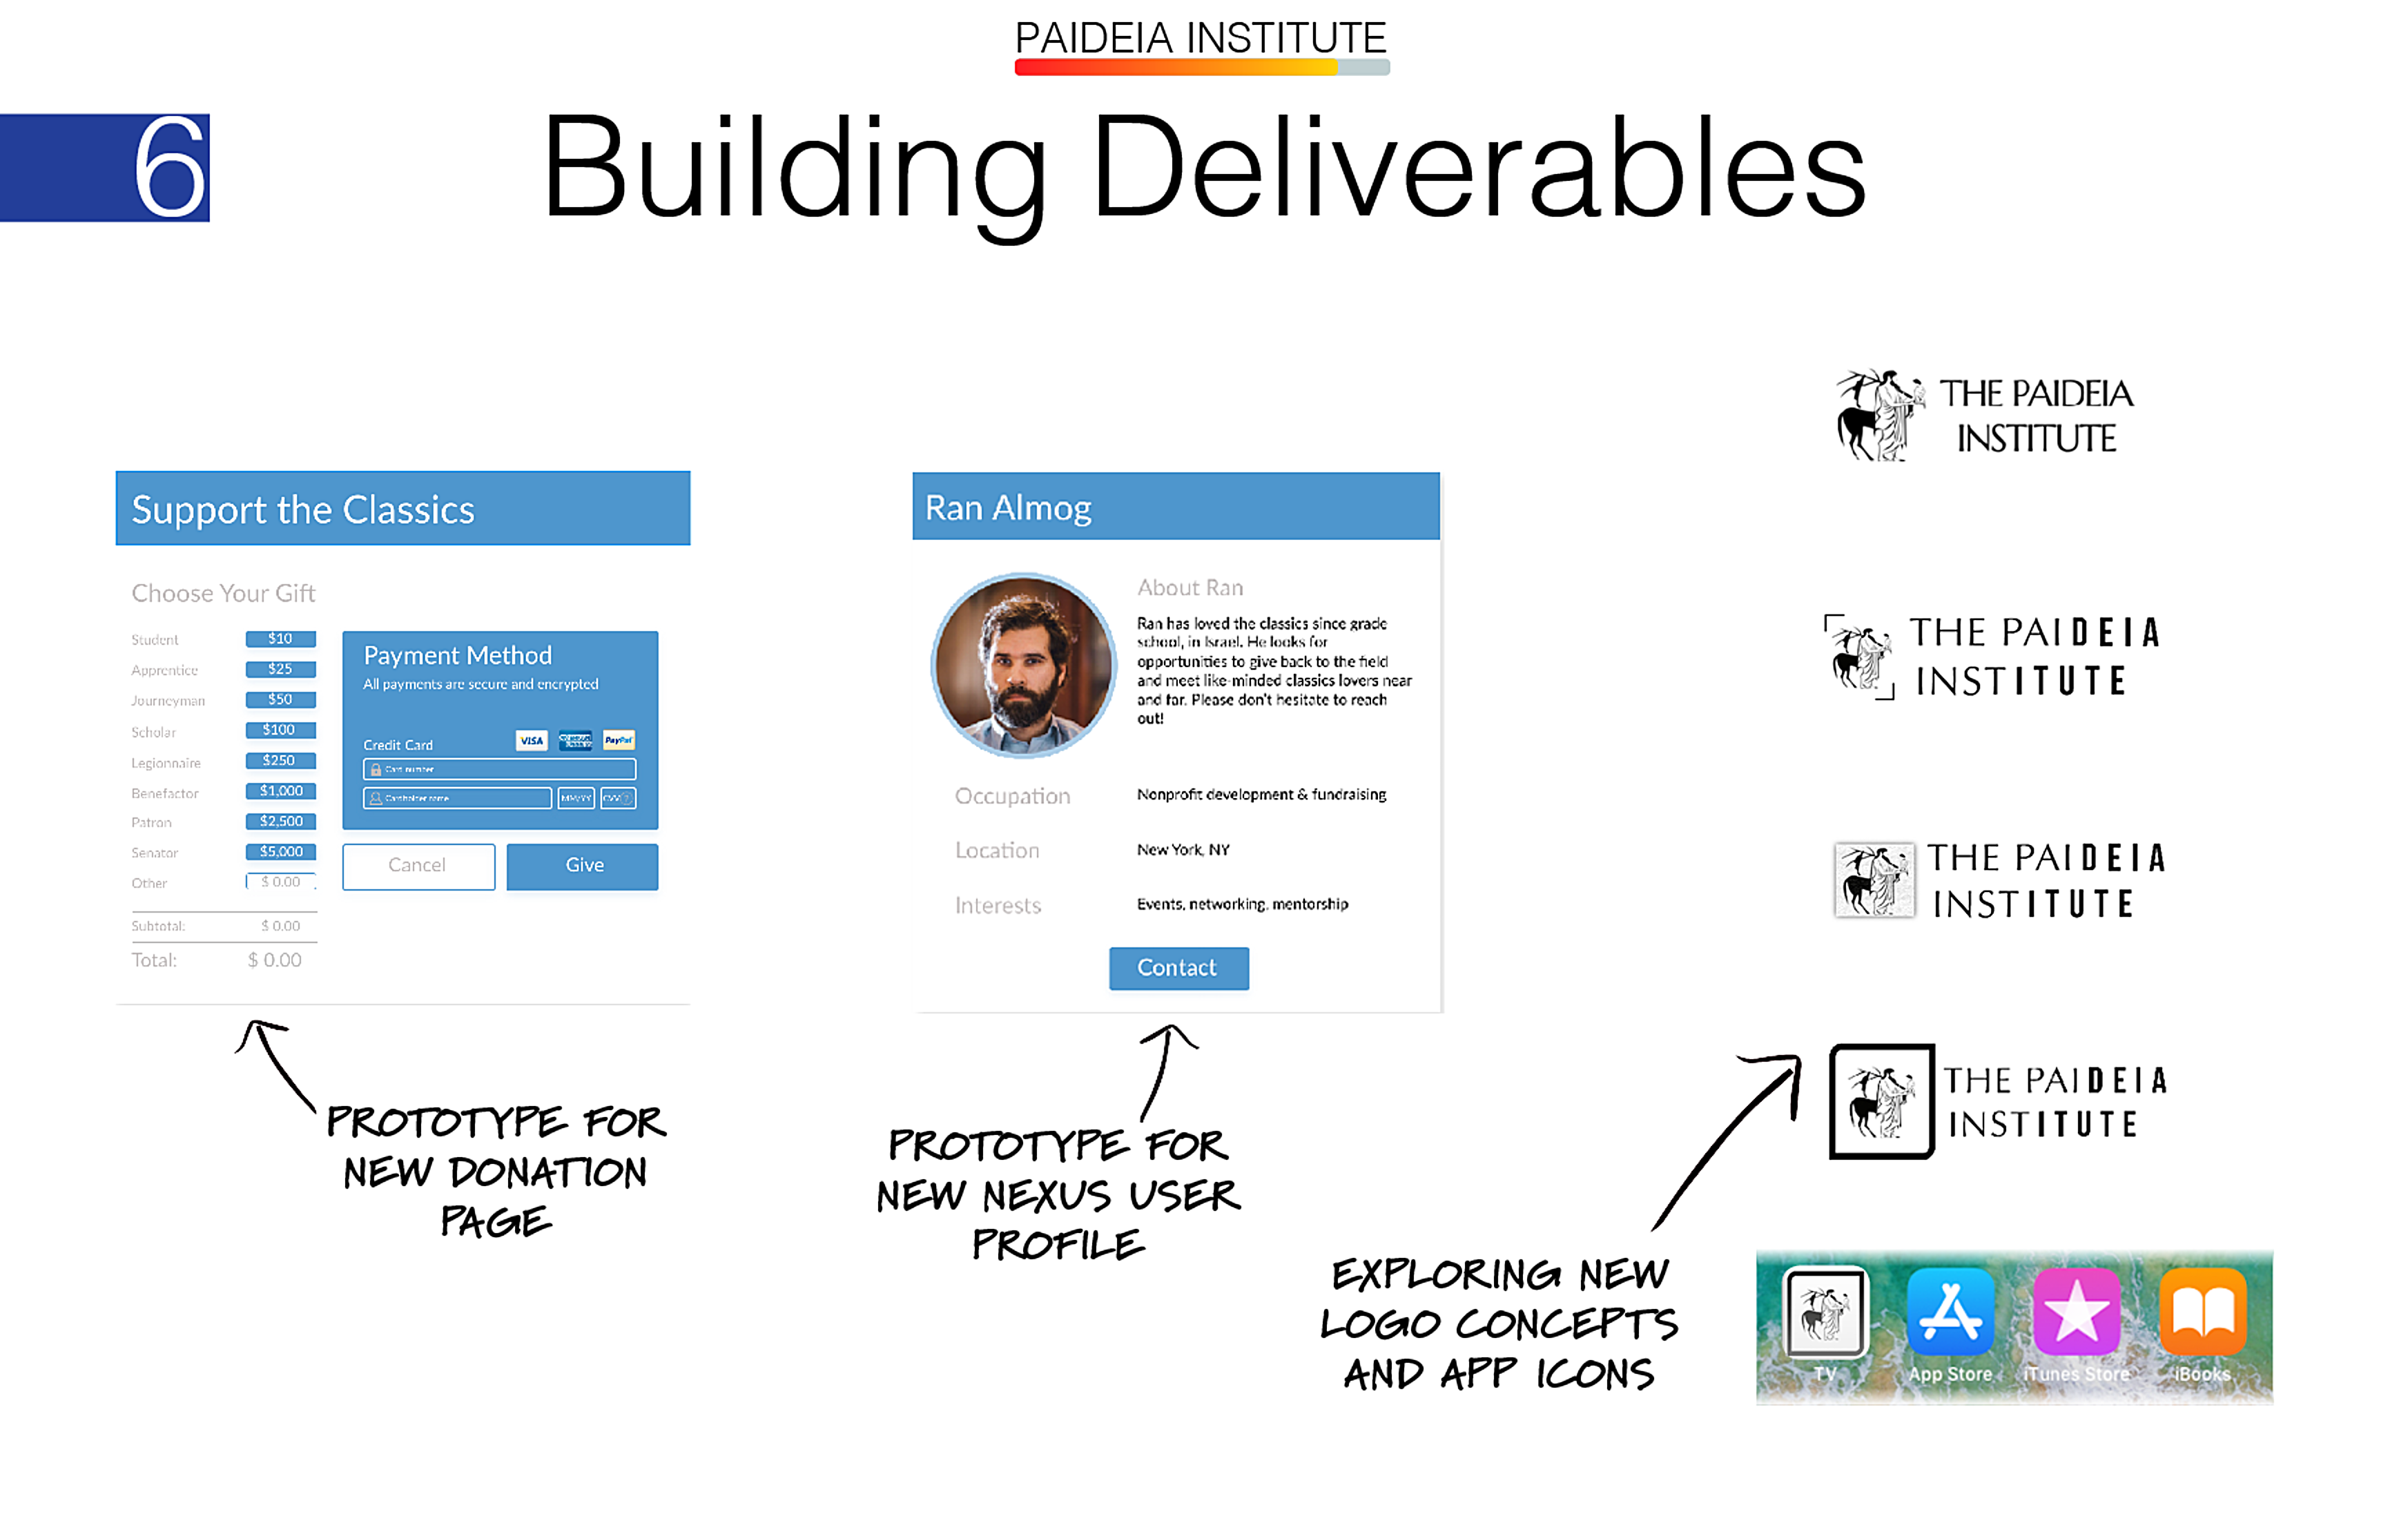 building product deliverables including mobile app icons, user bio popup pages, and a donations page